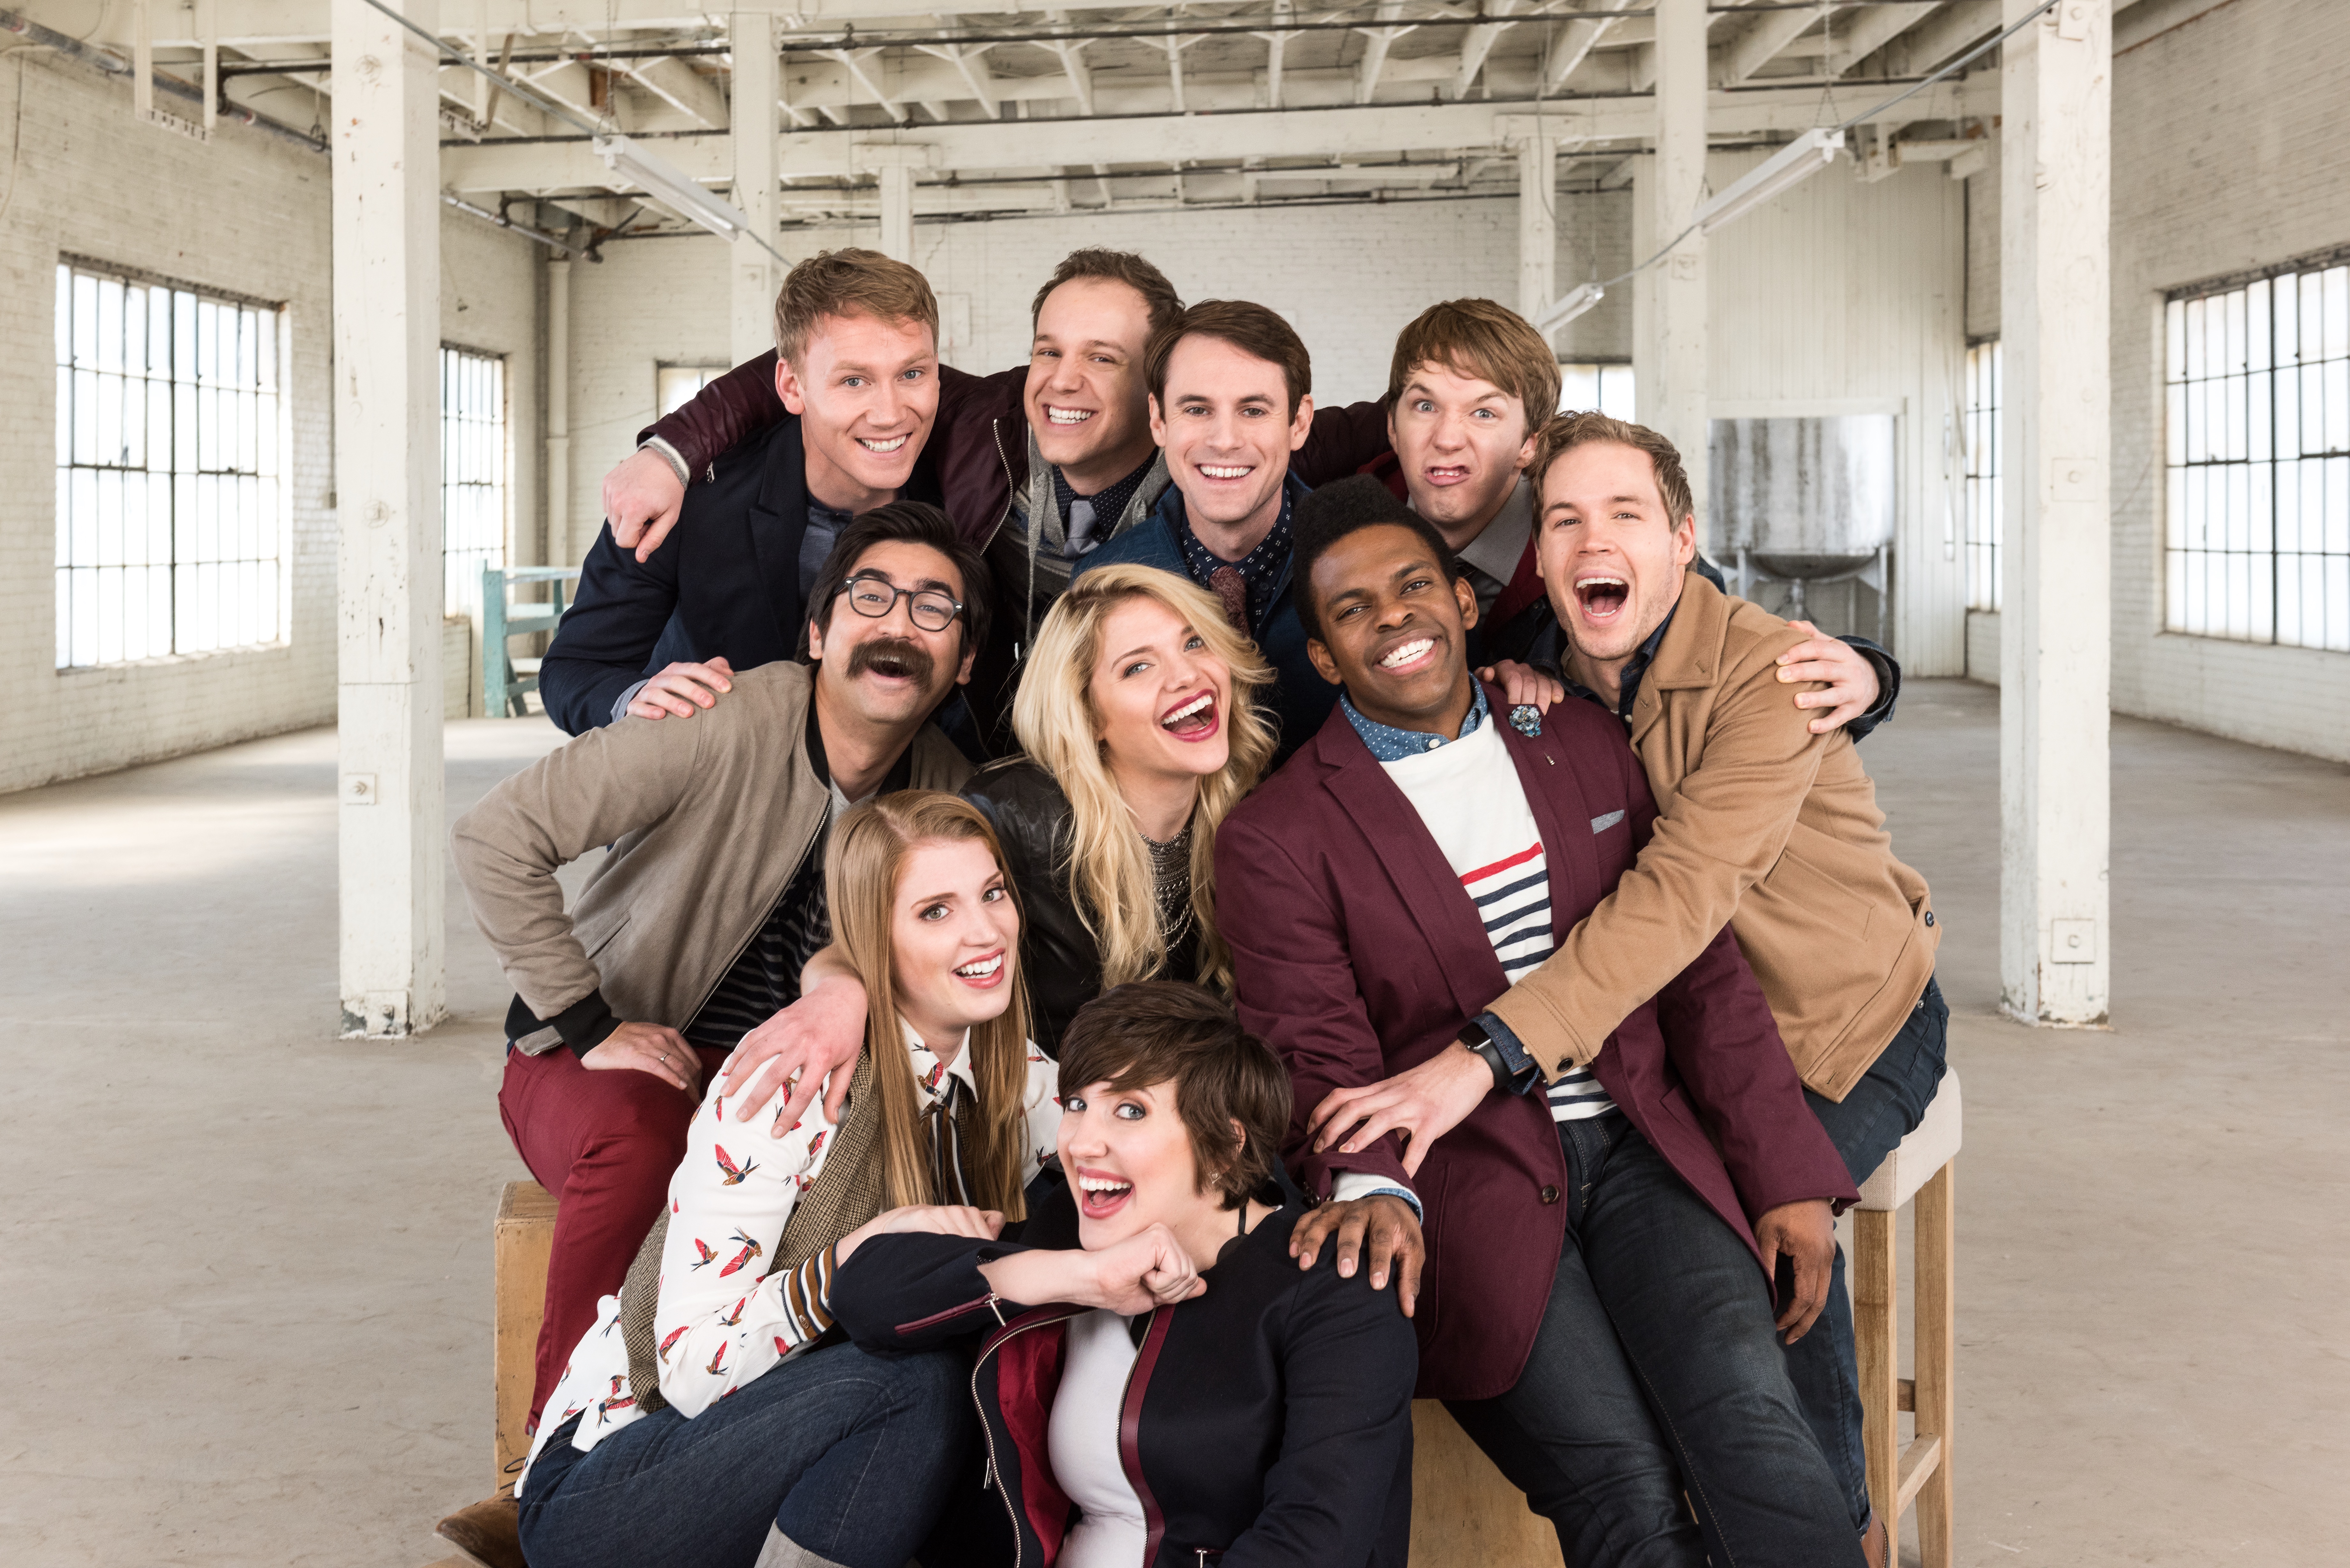 Studio C Cast To Appear In Live Broadcast For Mormon Youth